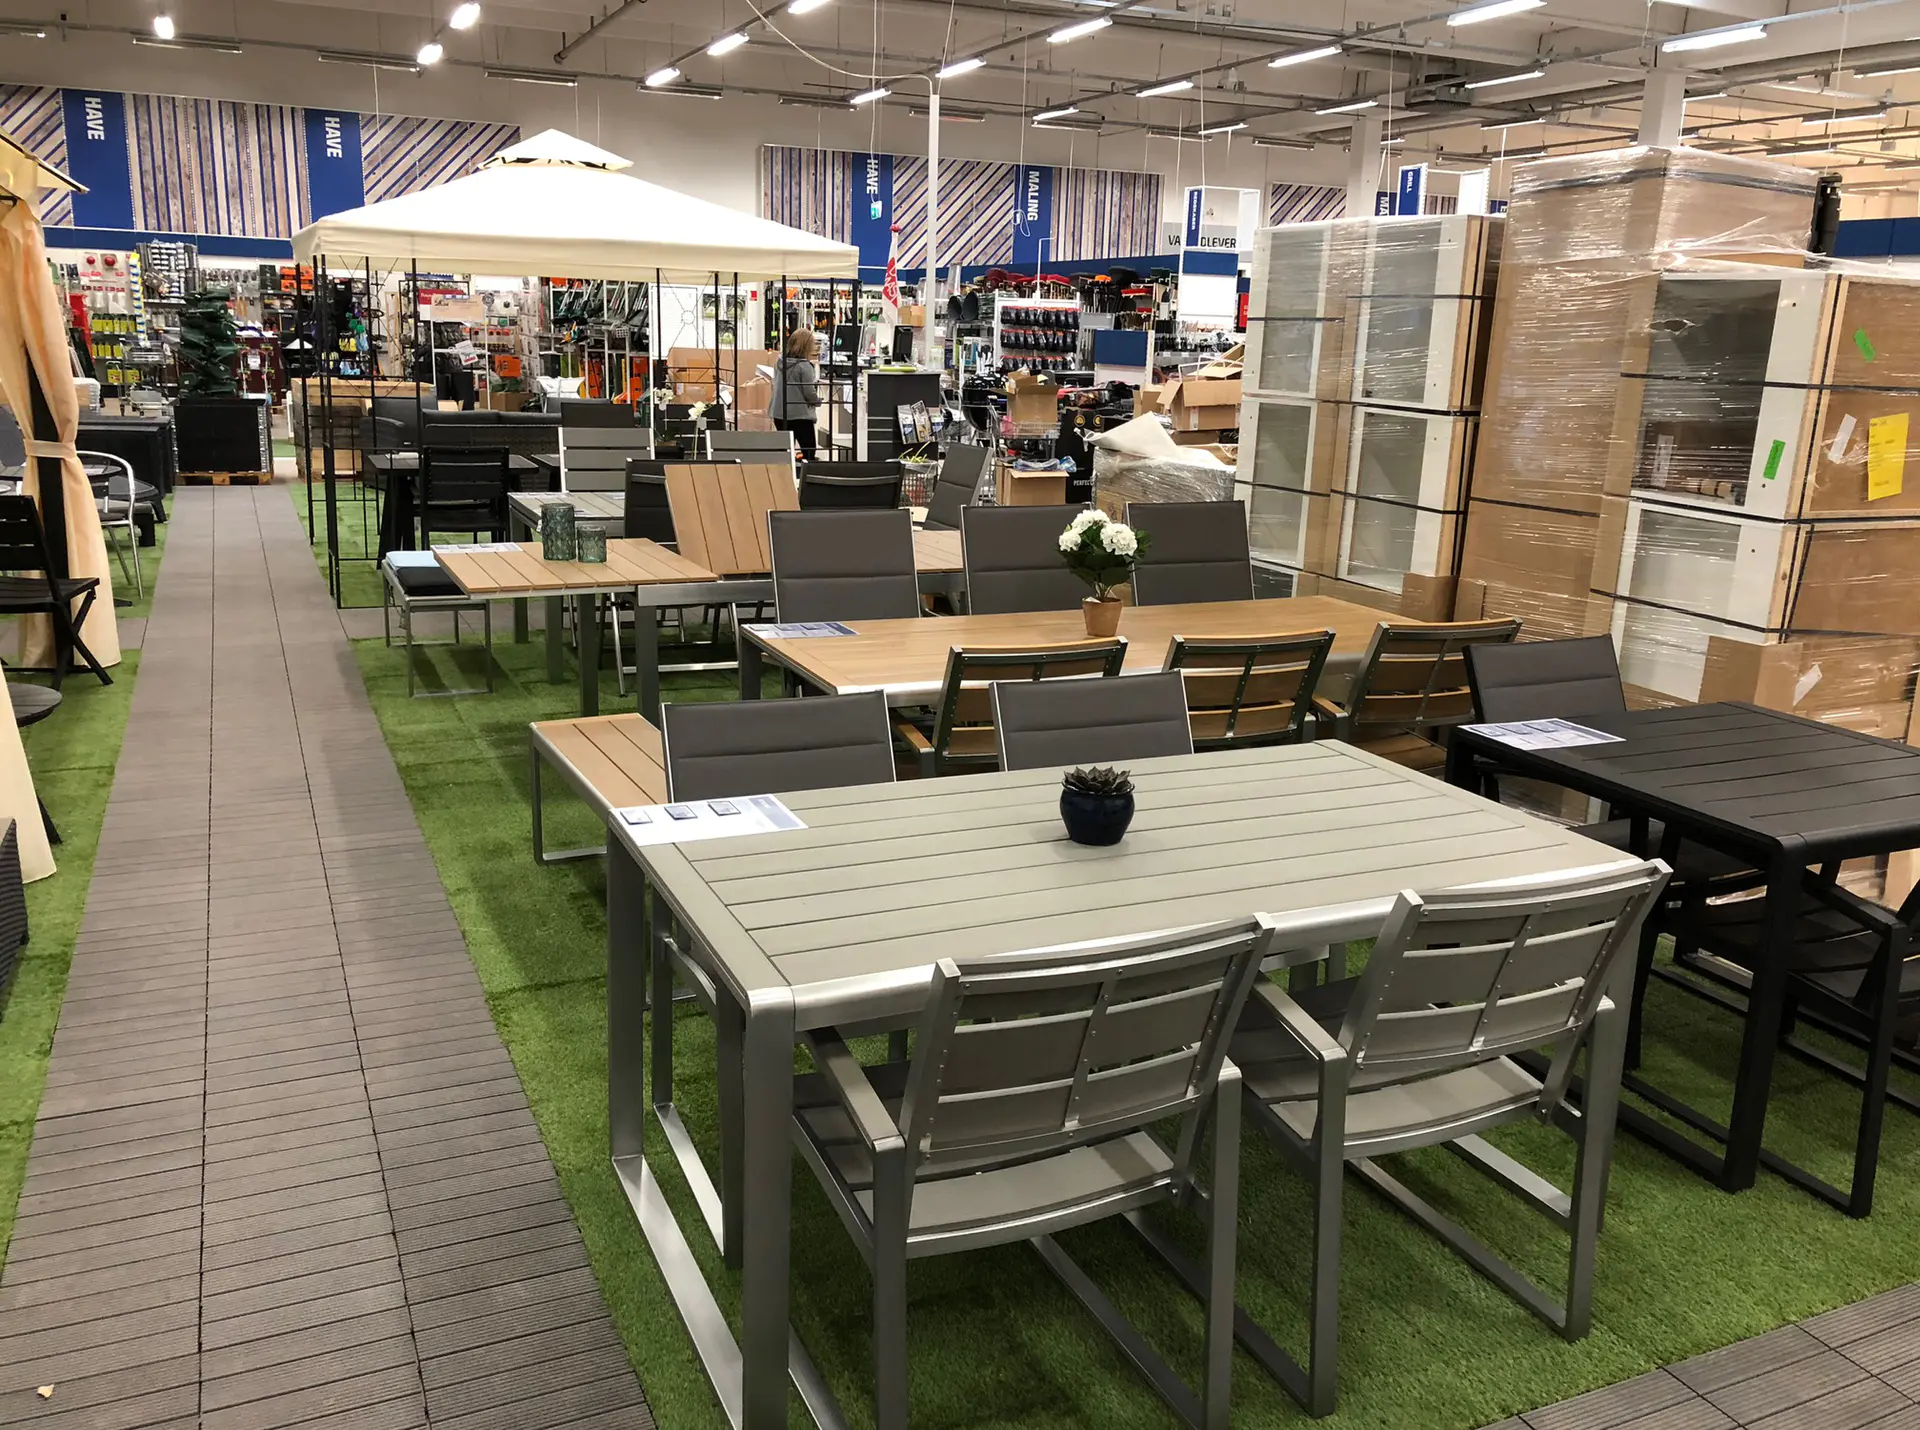 Jiabang WPC & artificial grass decking tiles for Chain store floor renew project in Denmark